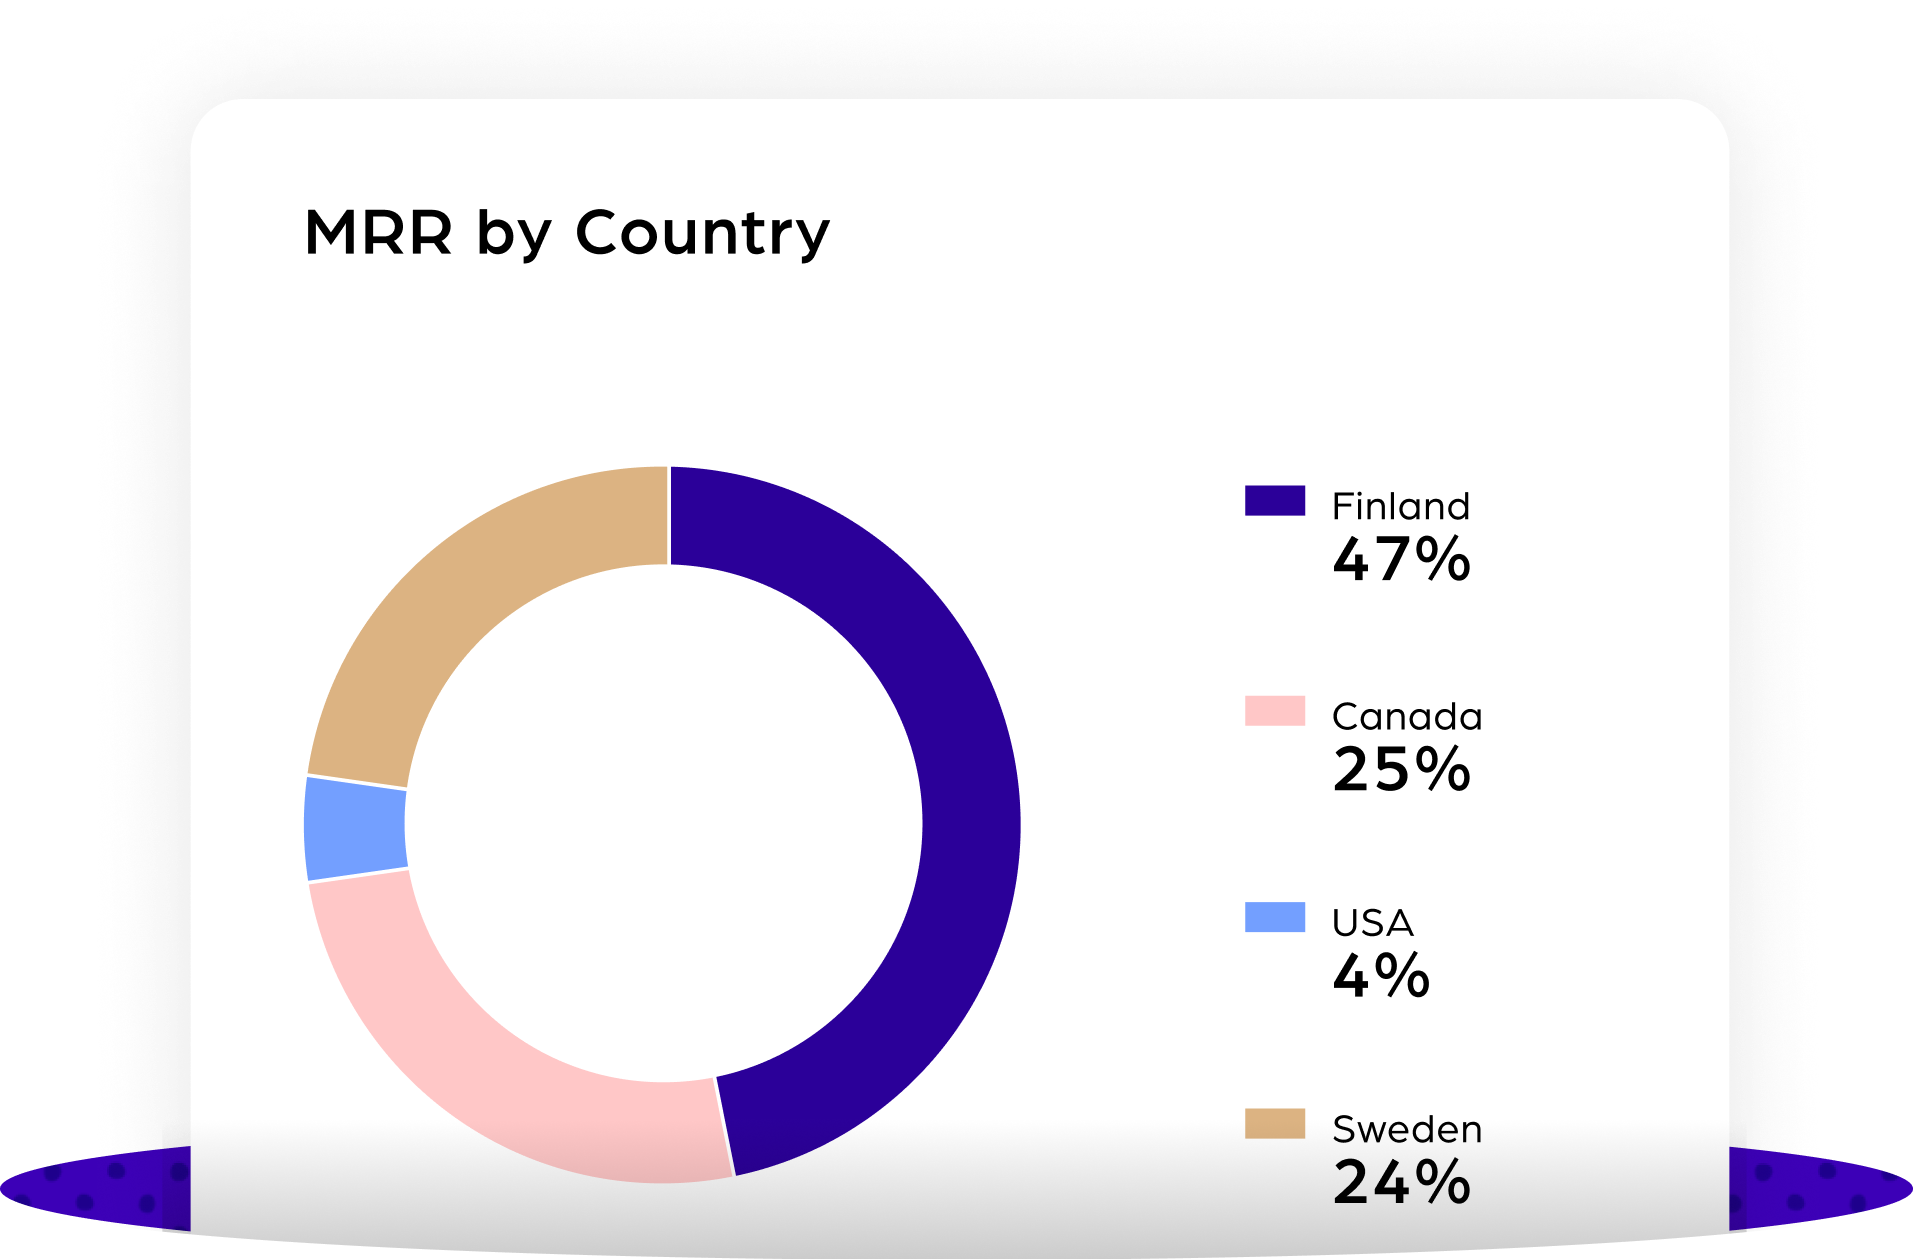 MRR by Country